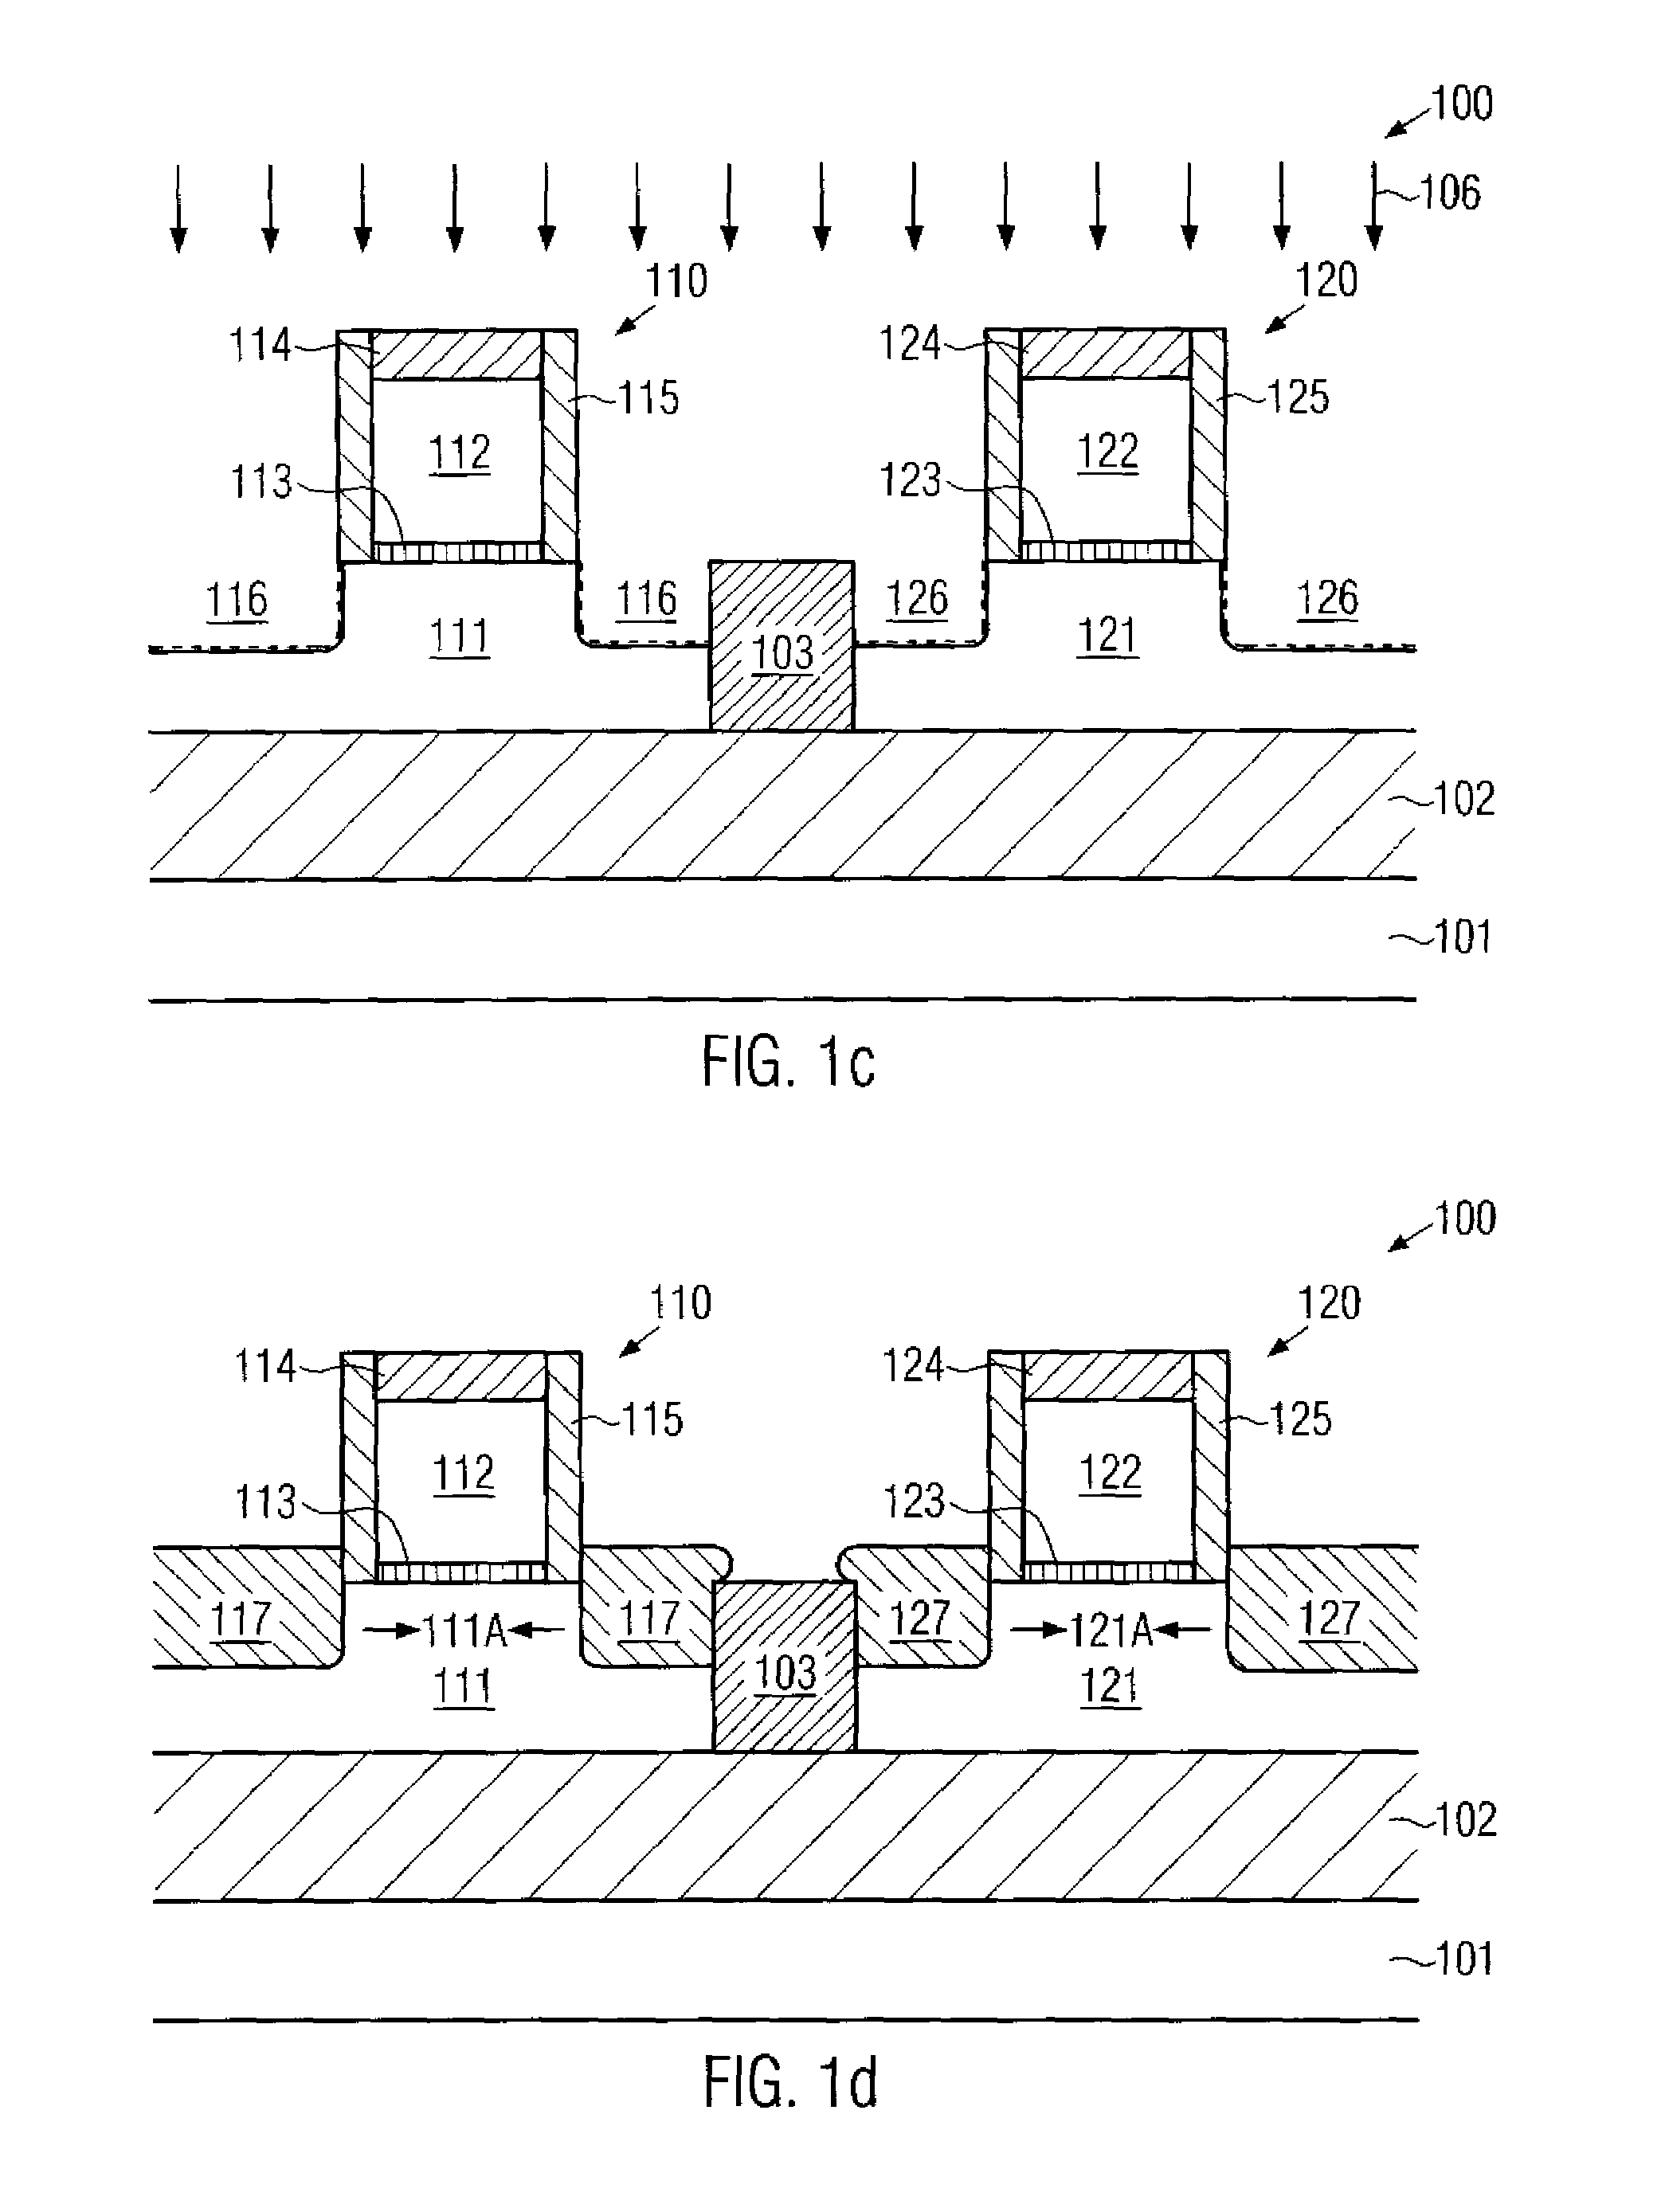 Technique for forming recessed strained drain/source regions in NMOS and PMOS transistors